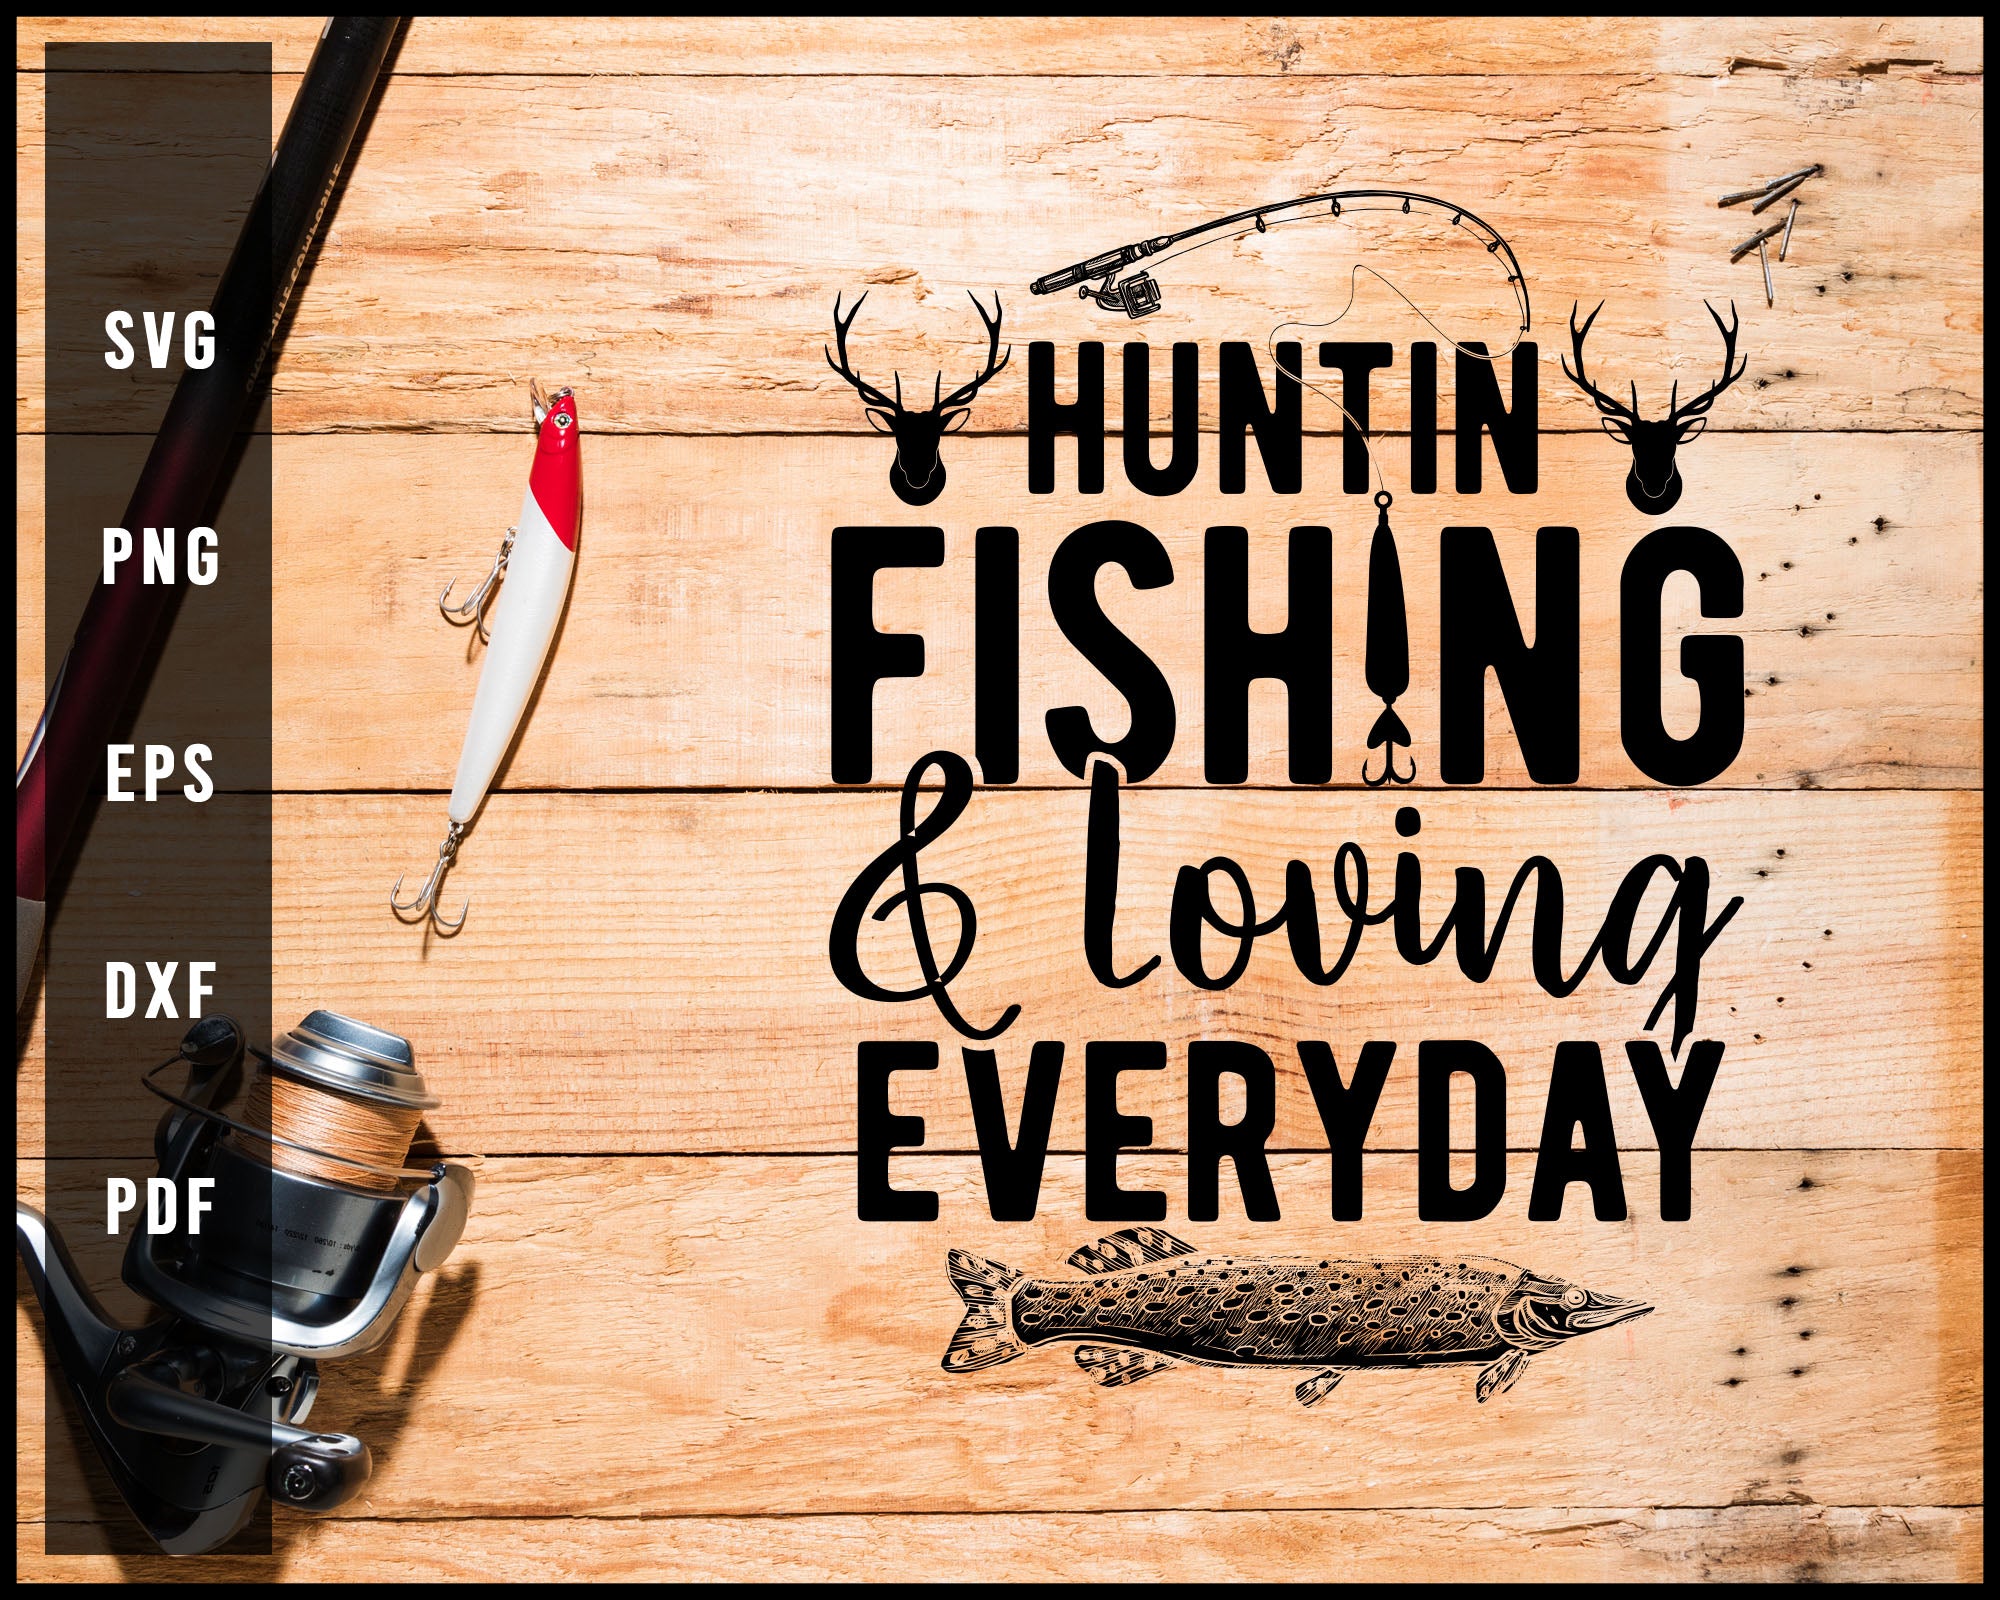 Huntin Fishin & lovin every day svg png Silhouette Designs For